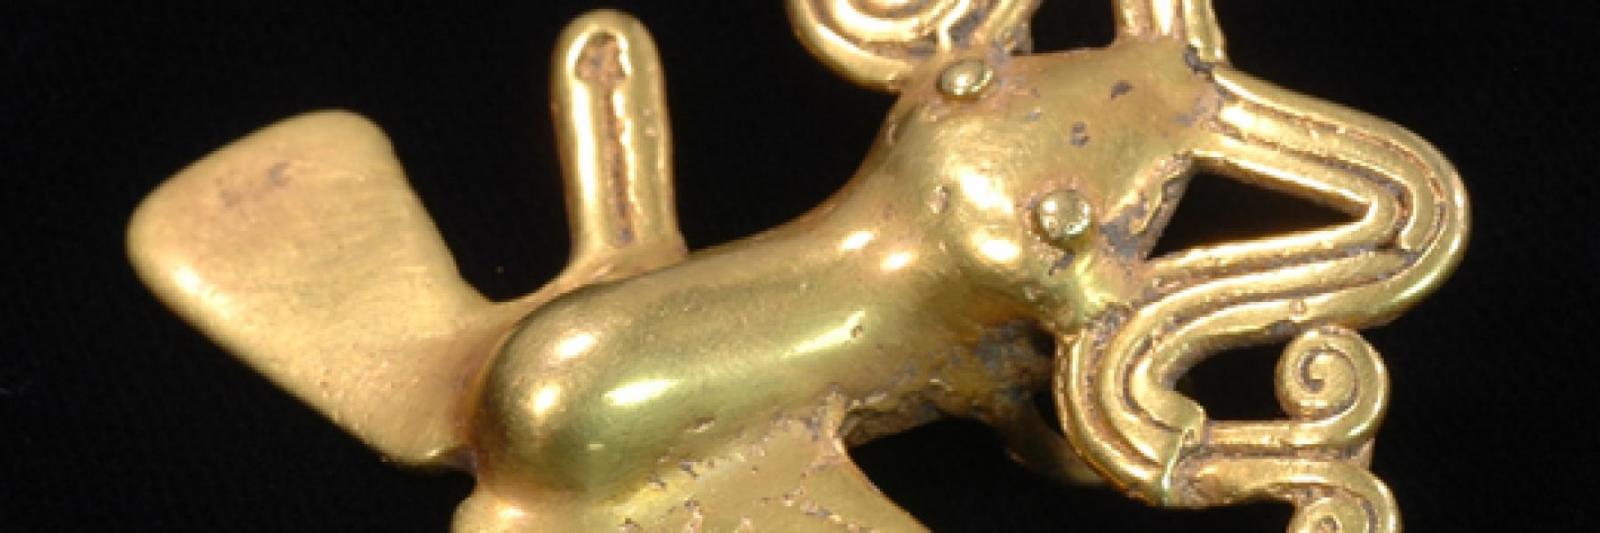 Gold Artifact of a frog